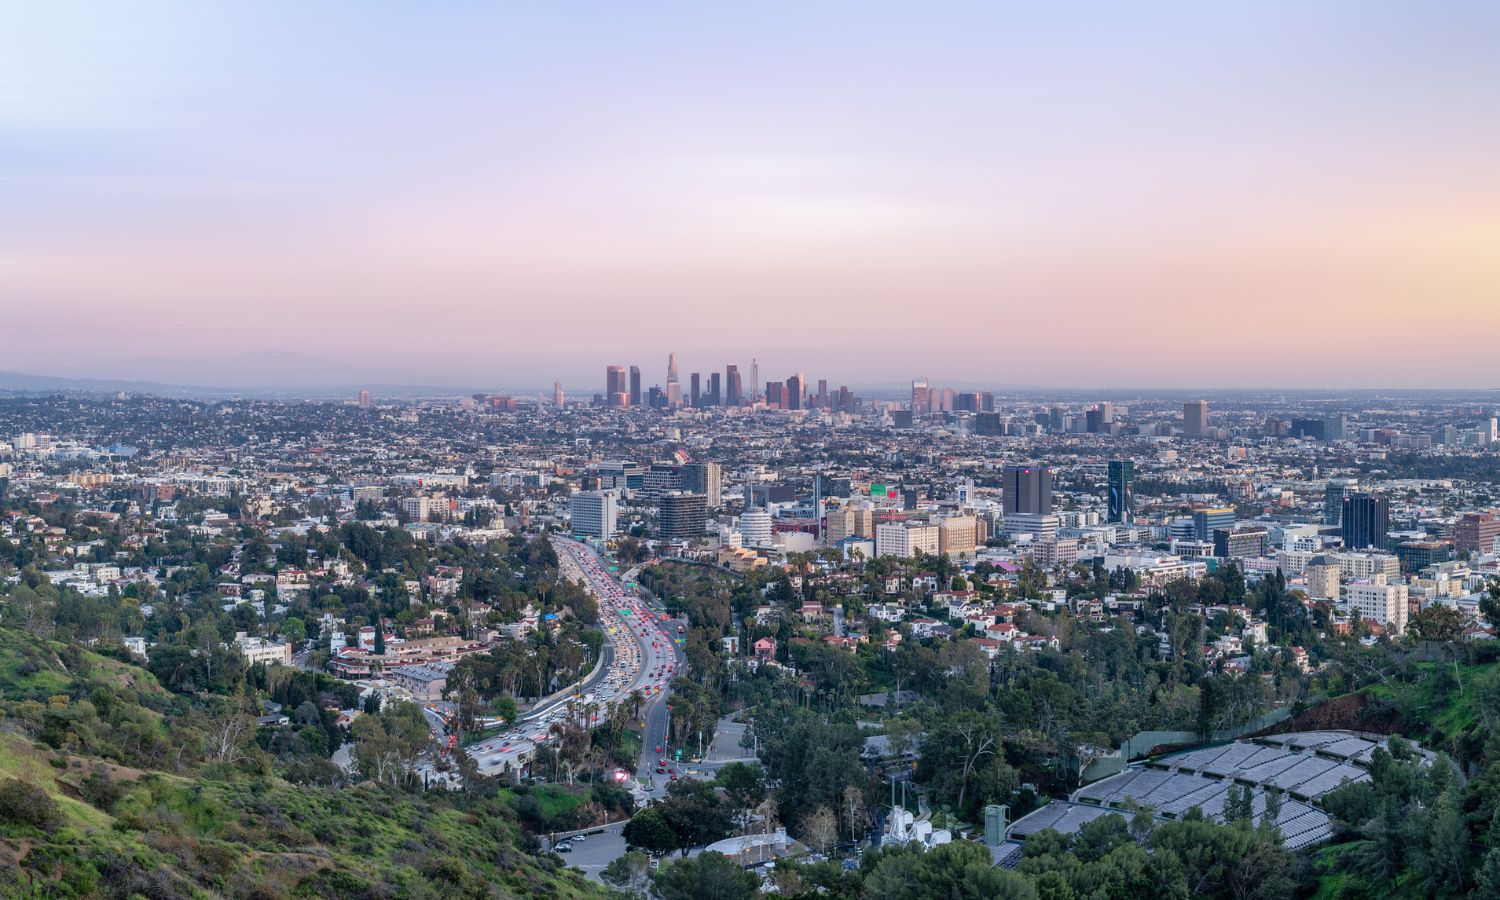 Things to do in LA